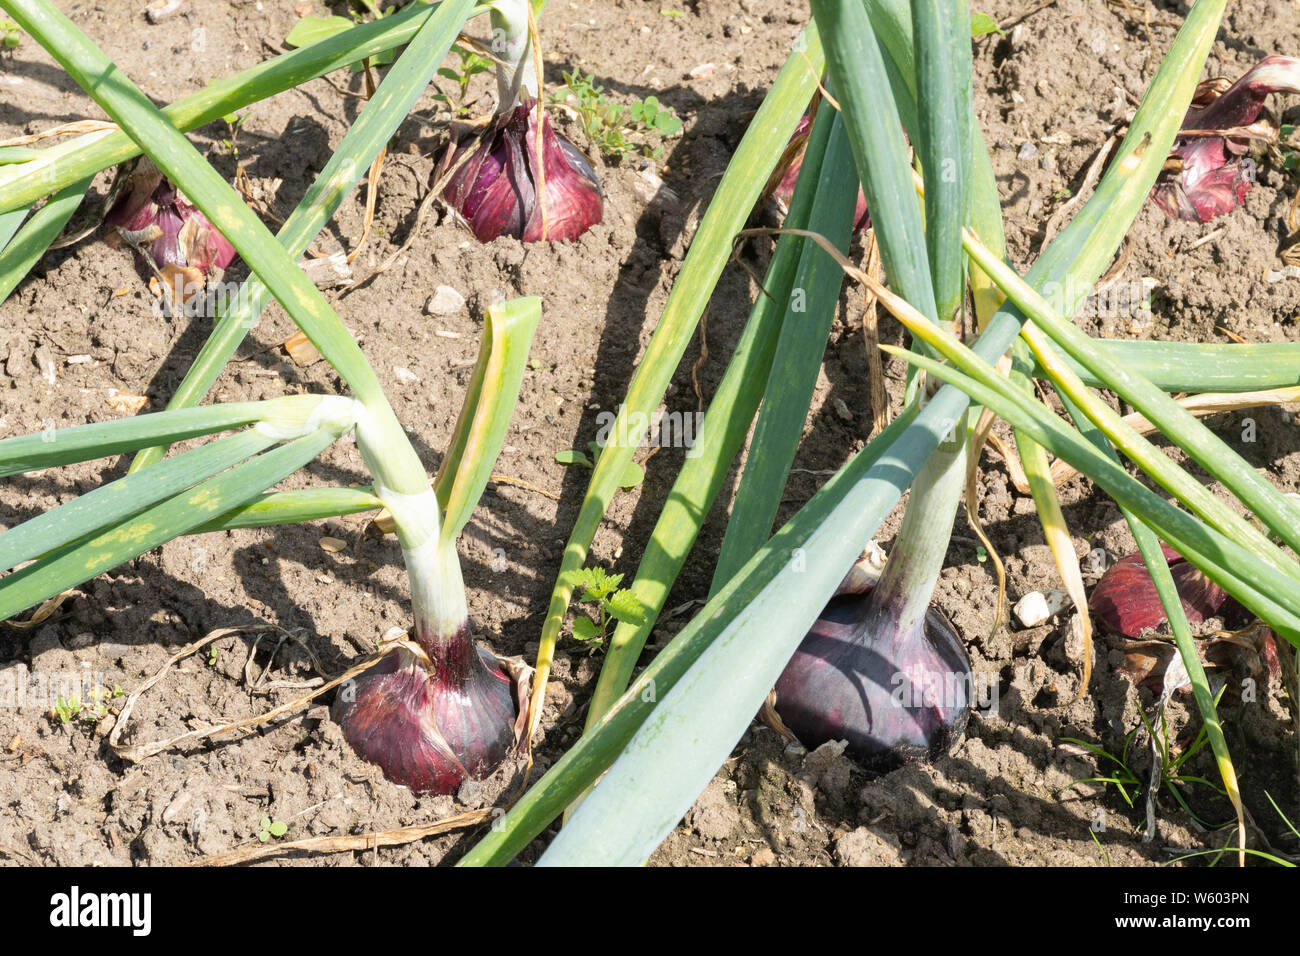 Red Karmen onion variety growing in a vegetable garden in summer, UK Stock Photo